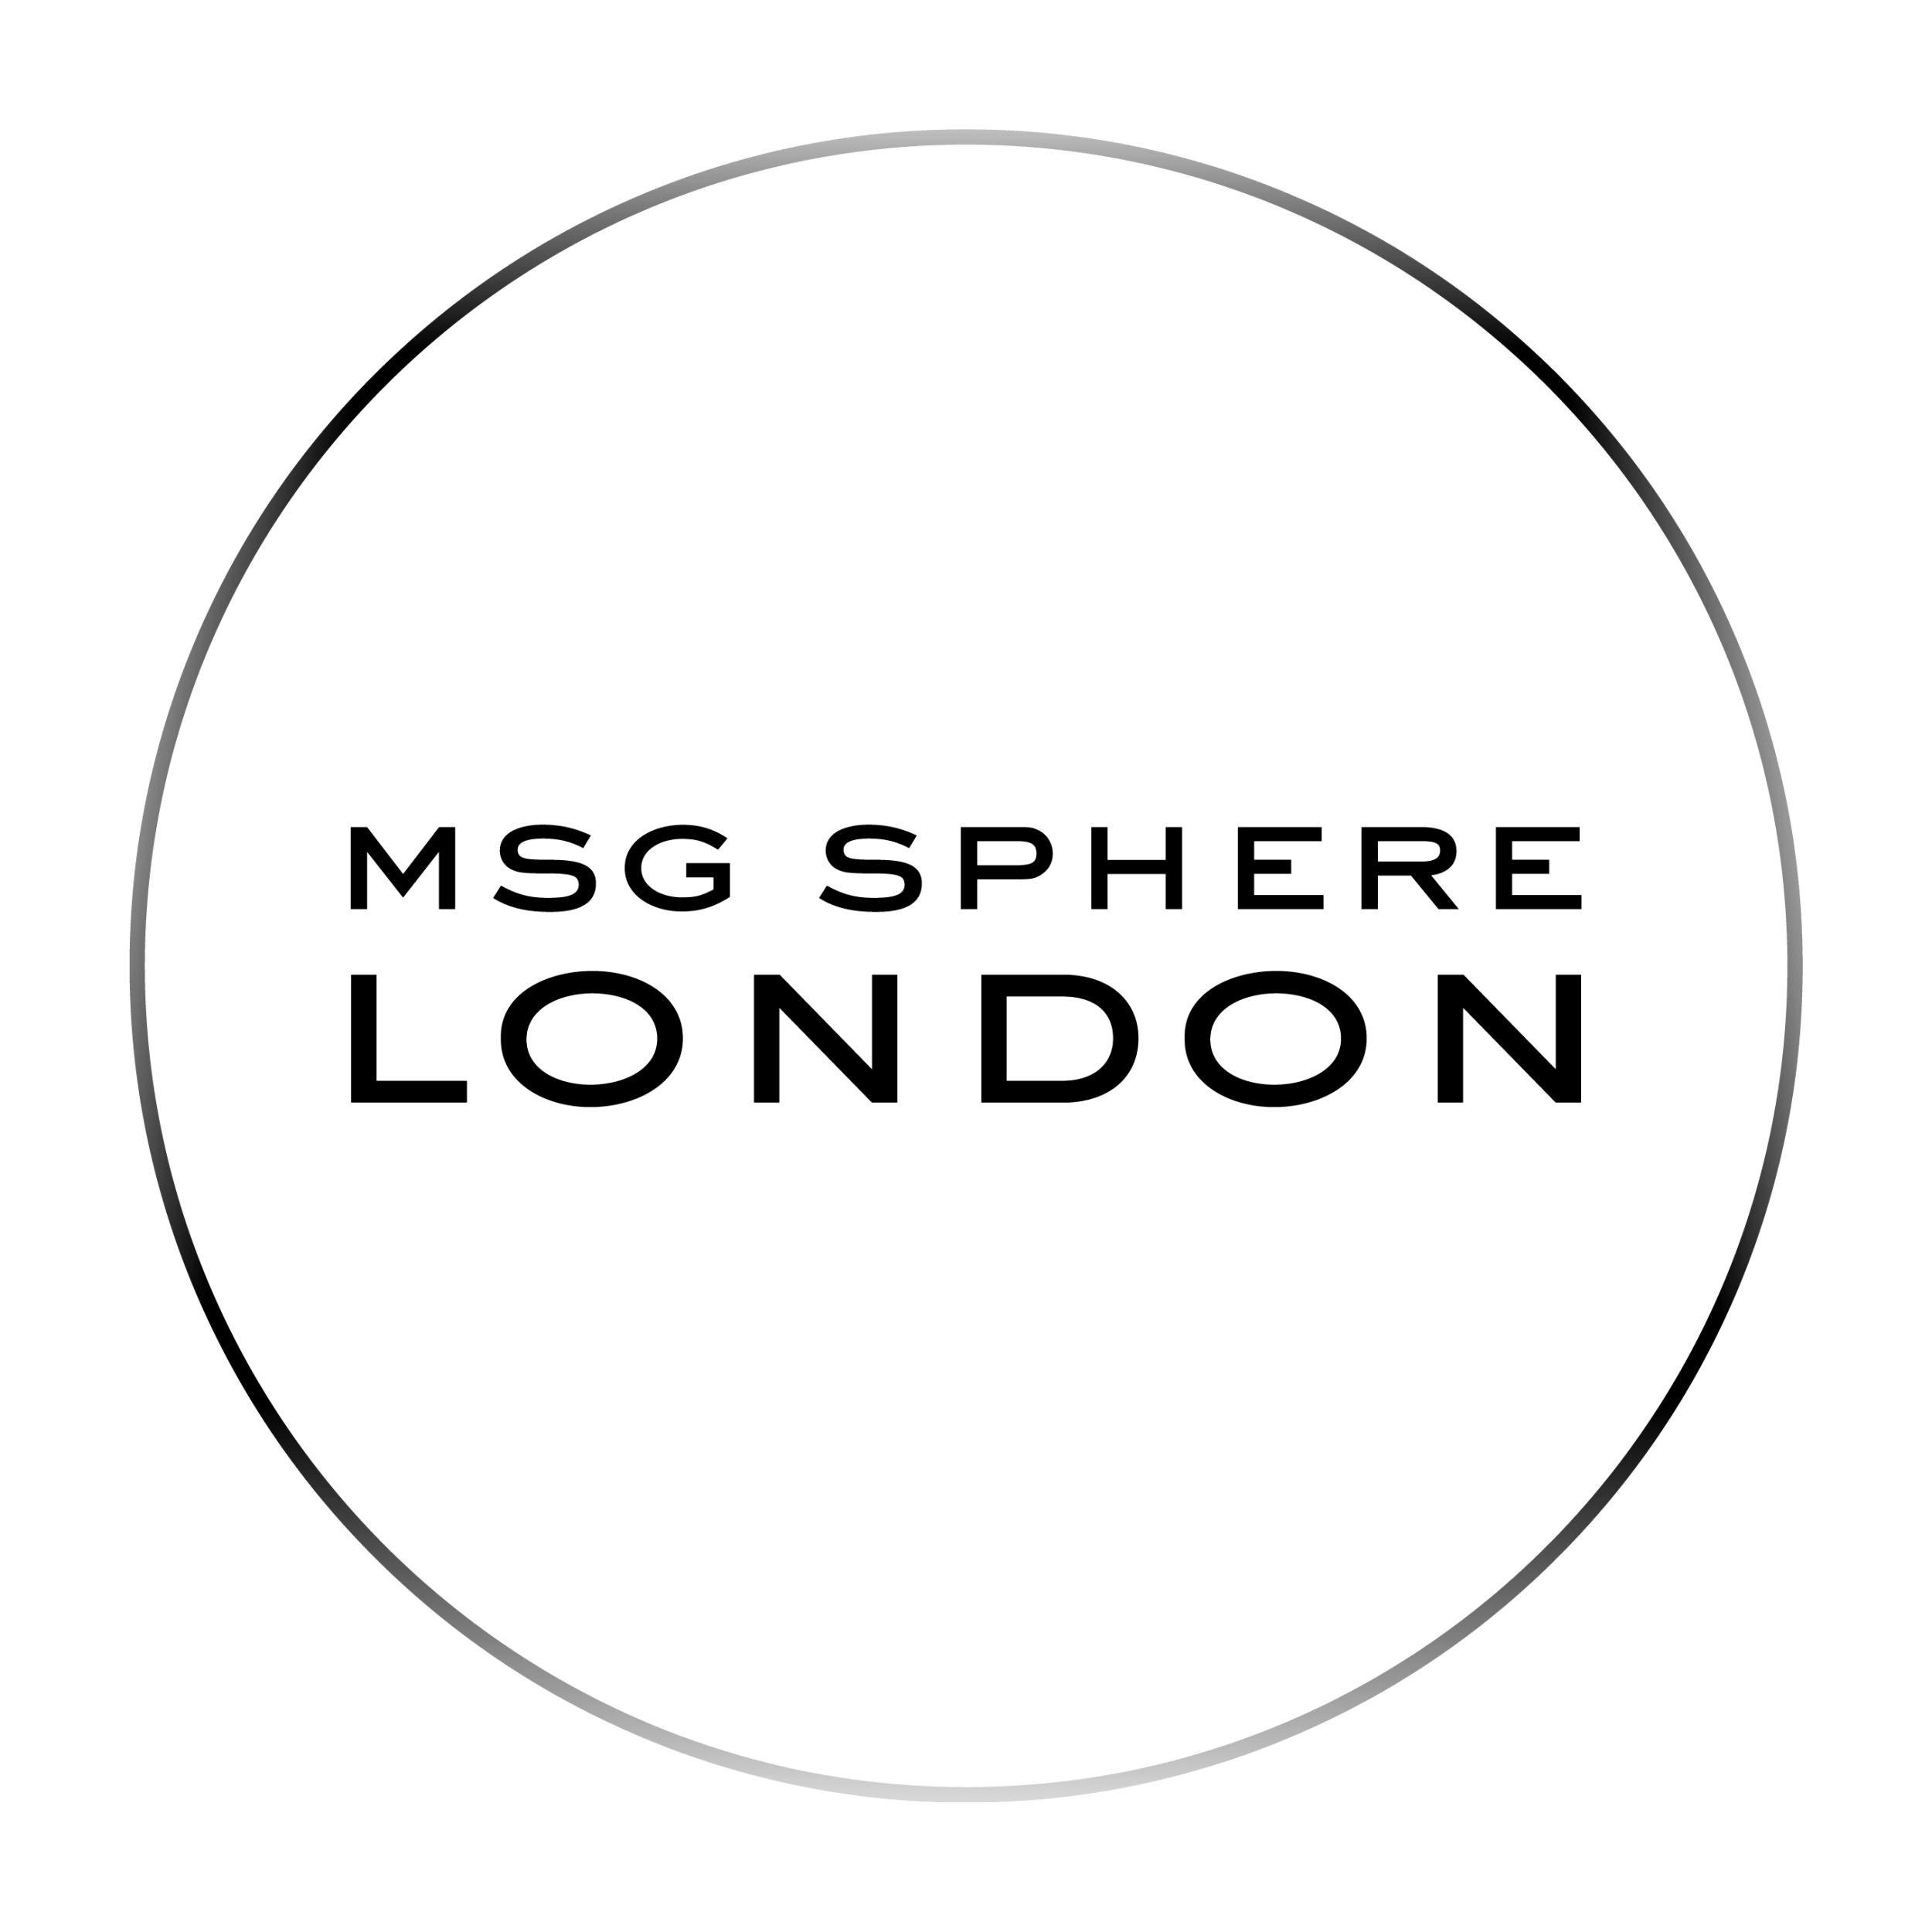 White Sphere Logo - How the MSG Sphere London could change the way you experience live